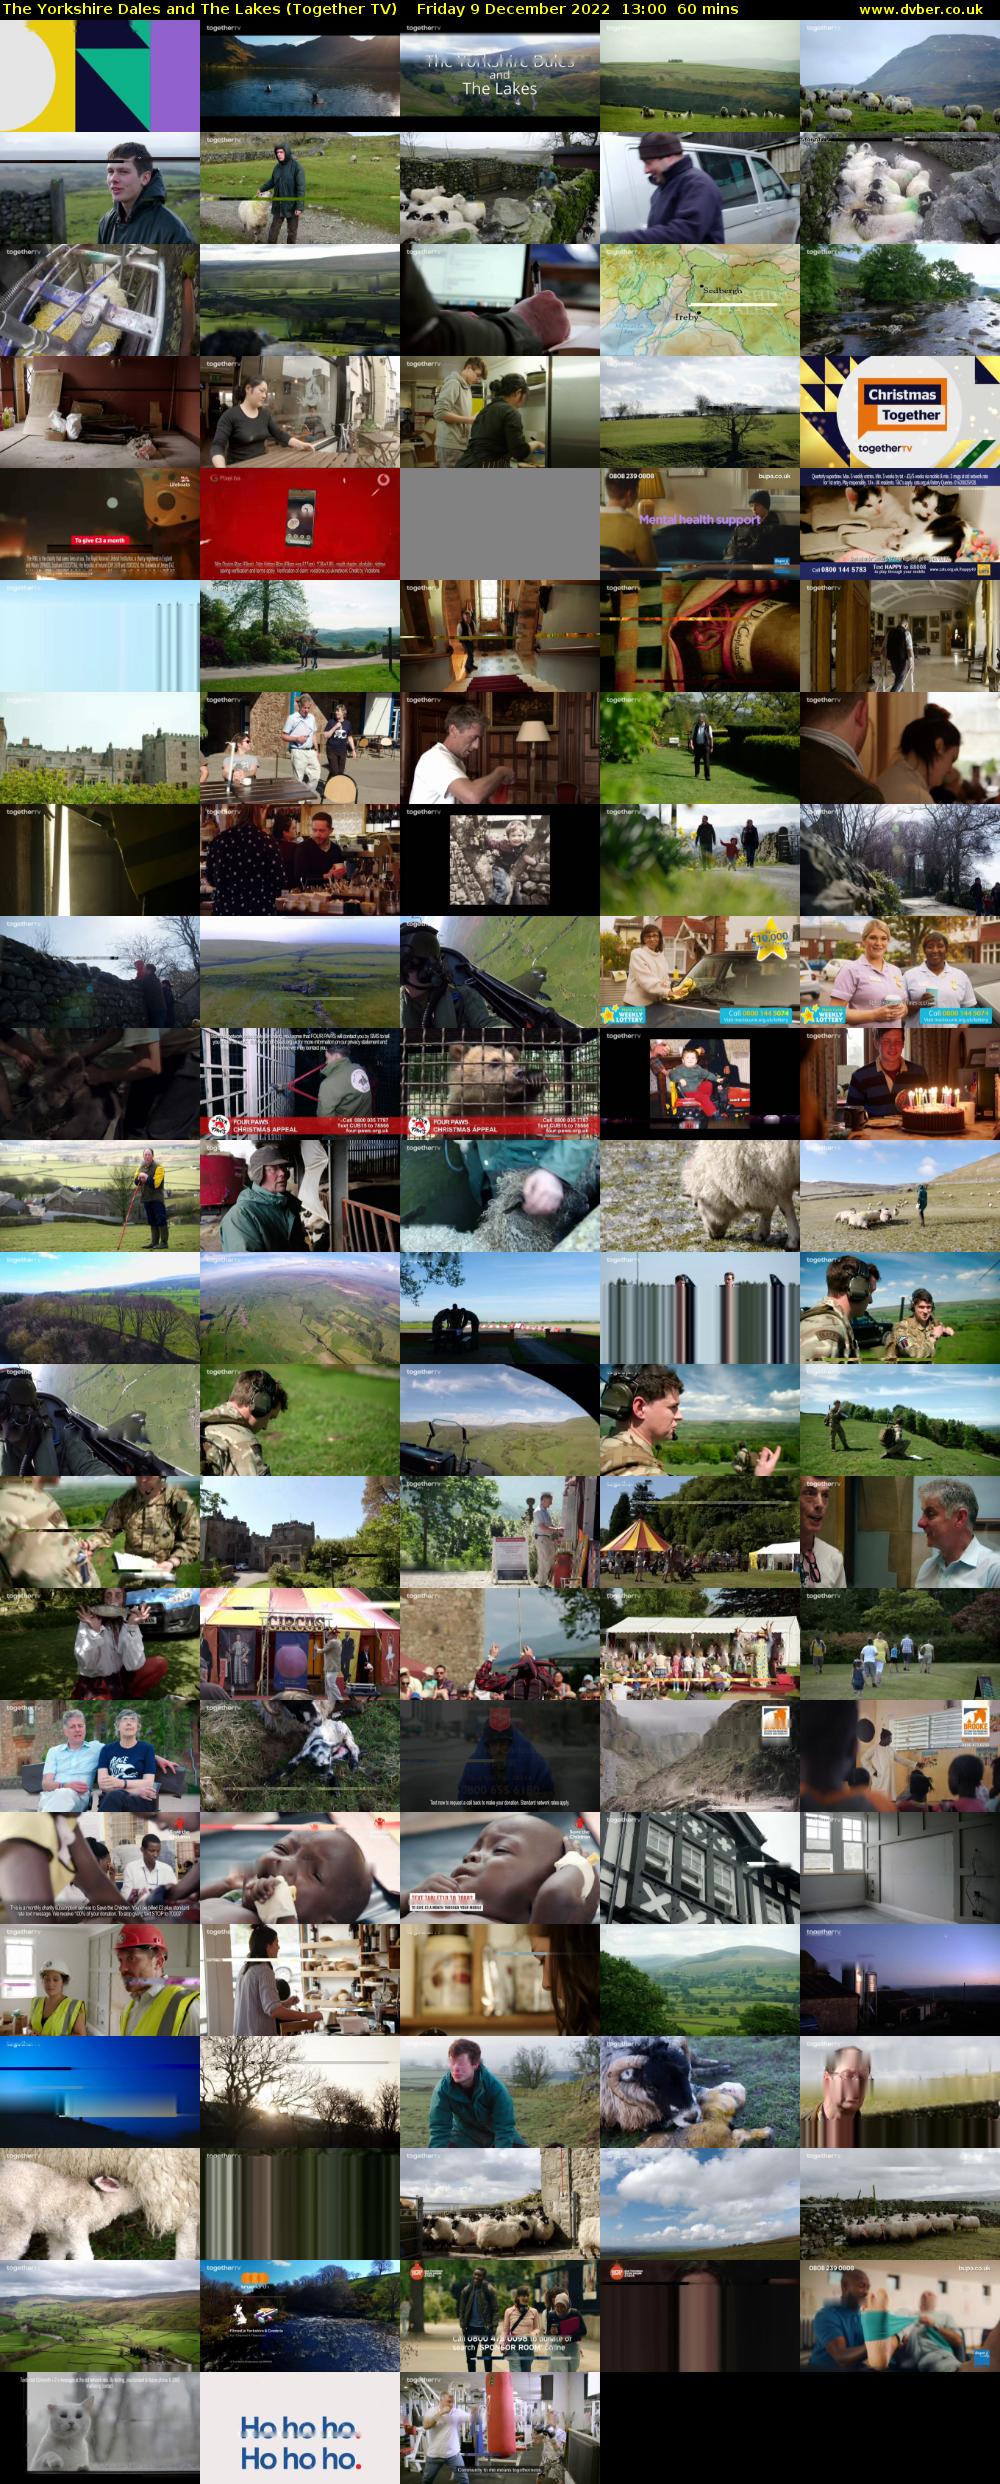 The Yorkshire Dales and The Lakes (Together TV) Friday 9 December 2022 13:00 - 14:00